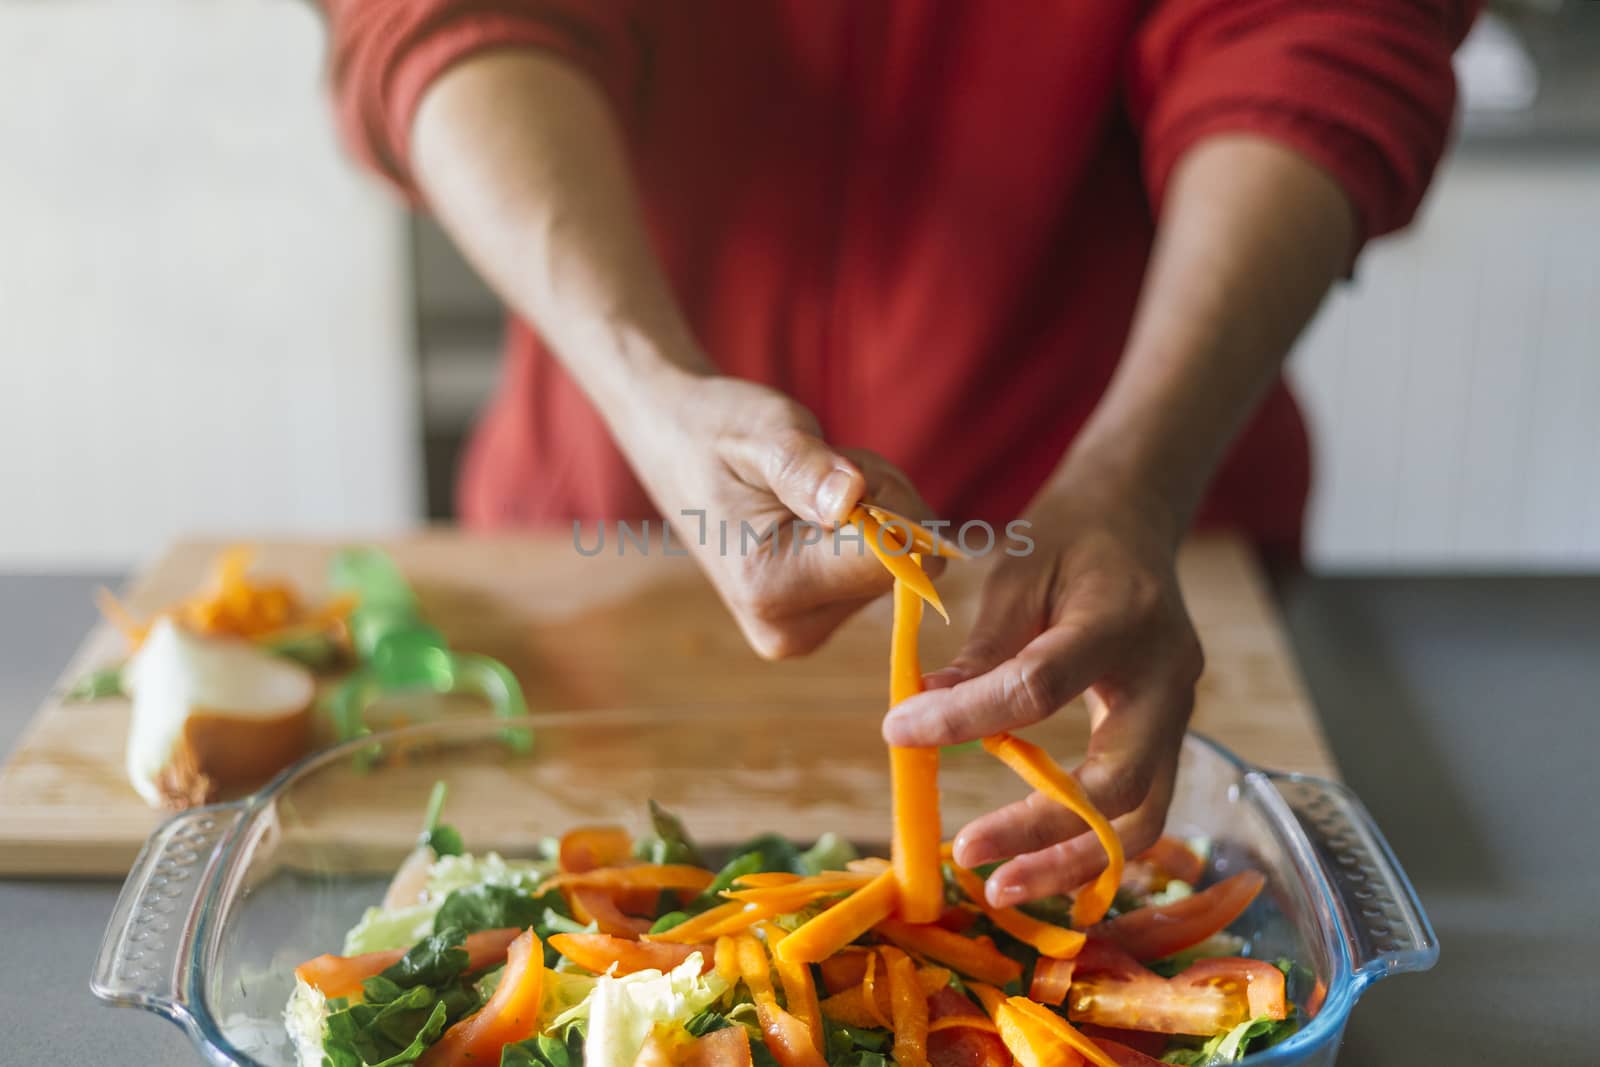 Woman cutting carrots and putting them in a salad with her hands